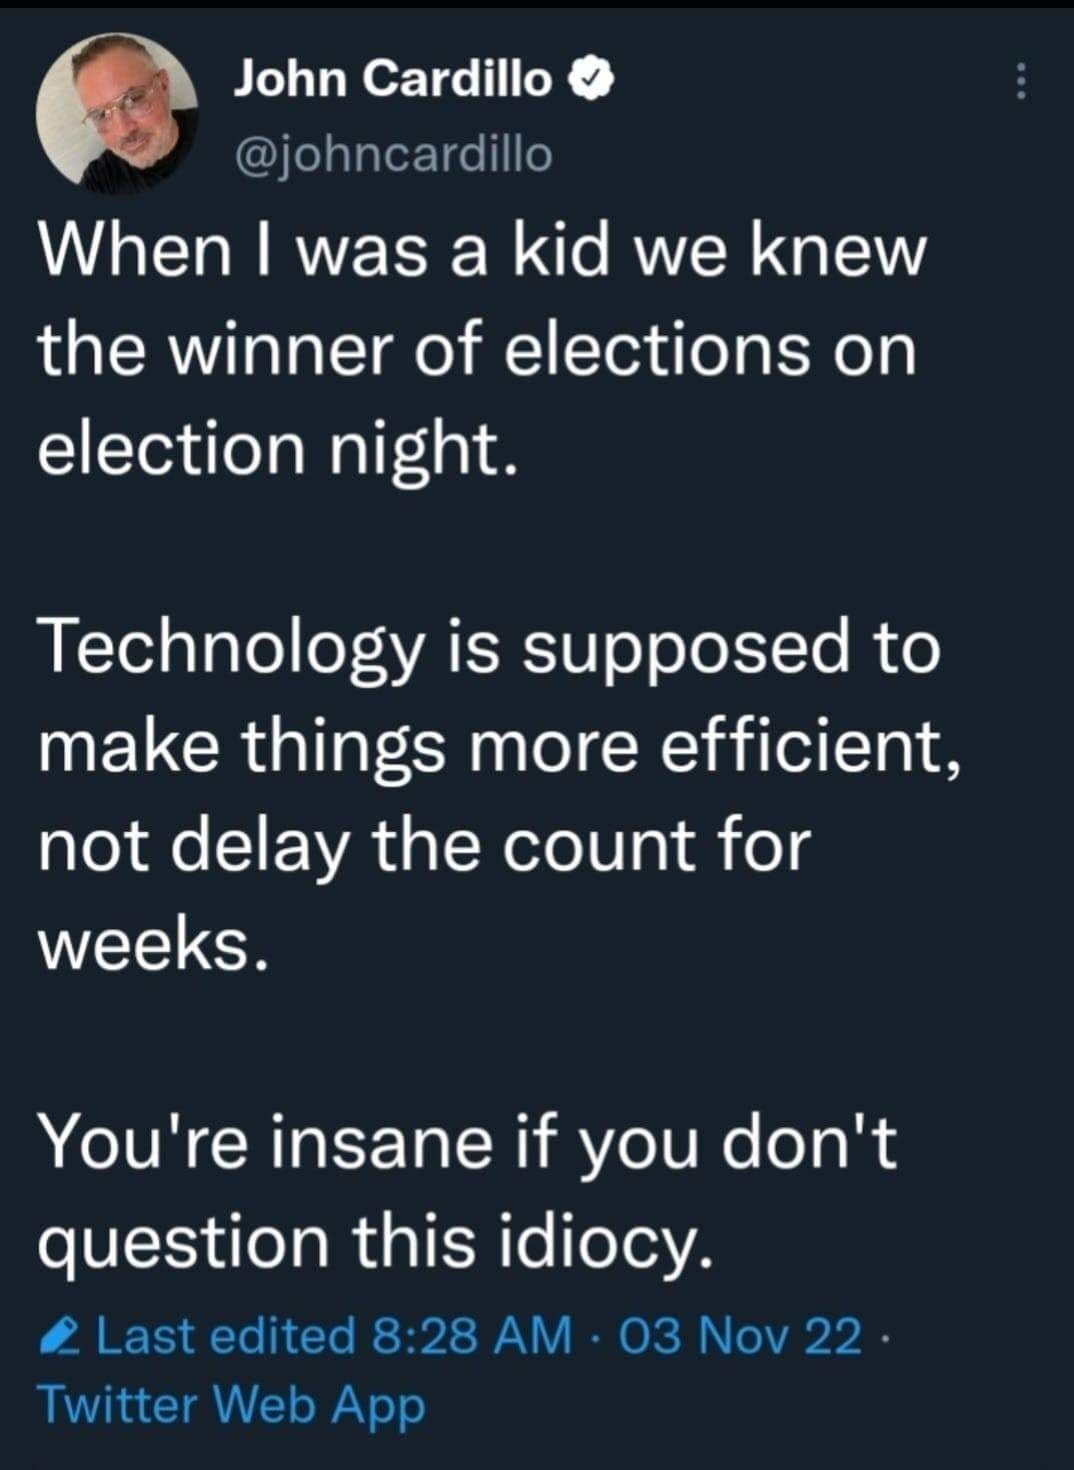 May be an image of 1 person and text that says 'John Cardillo @johncardillo When I was a kid we knew the winner of elections on election night. Technology is supposed to make things more efficient, not delay the count for weeks. You're insane if you don't question this idiocy. Last editer 8:28 AM 03 Nov 22 Twitter Web App'